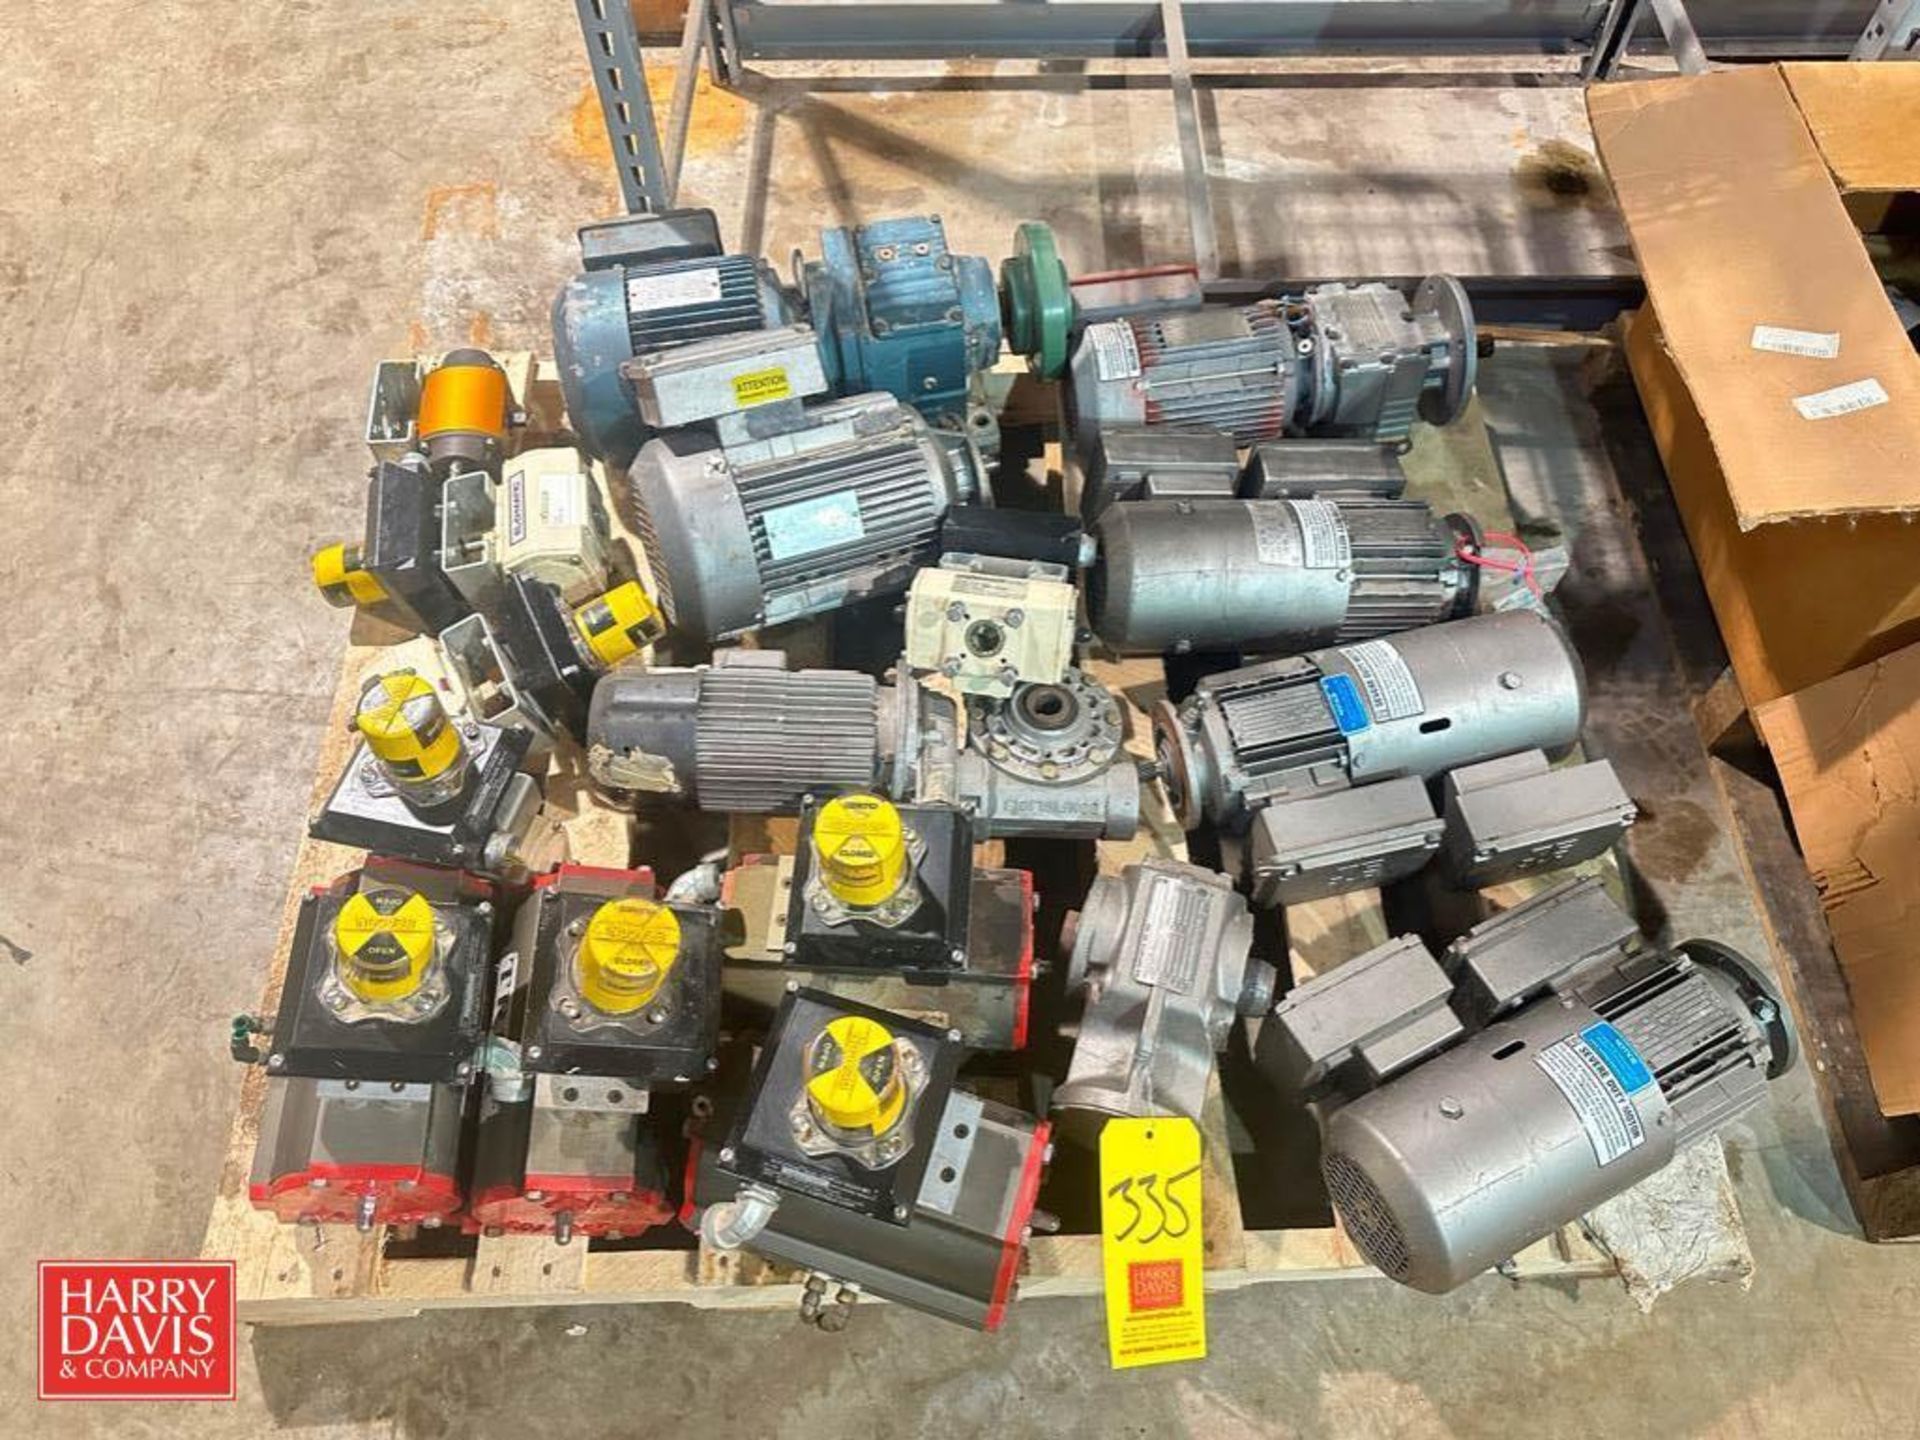 Assorted Motors, up to 2 HP, Gear Reducing Drives and Air Actuators